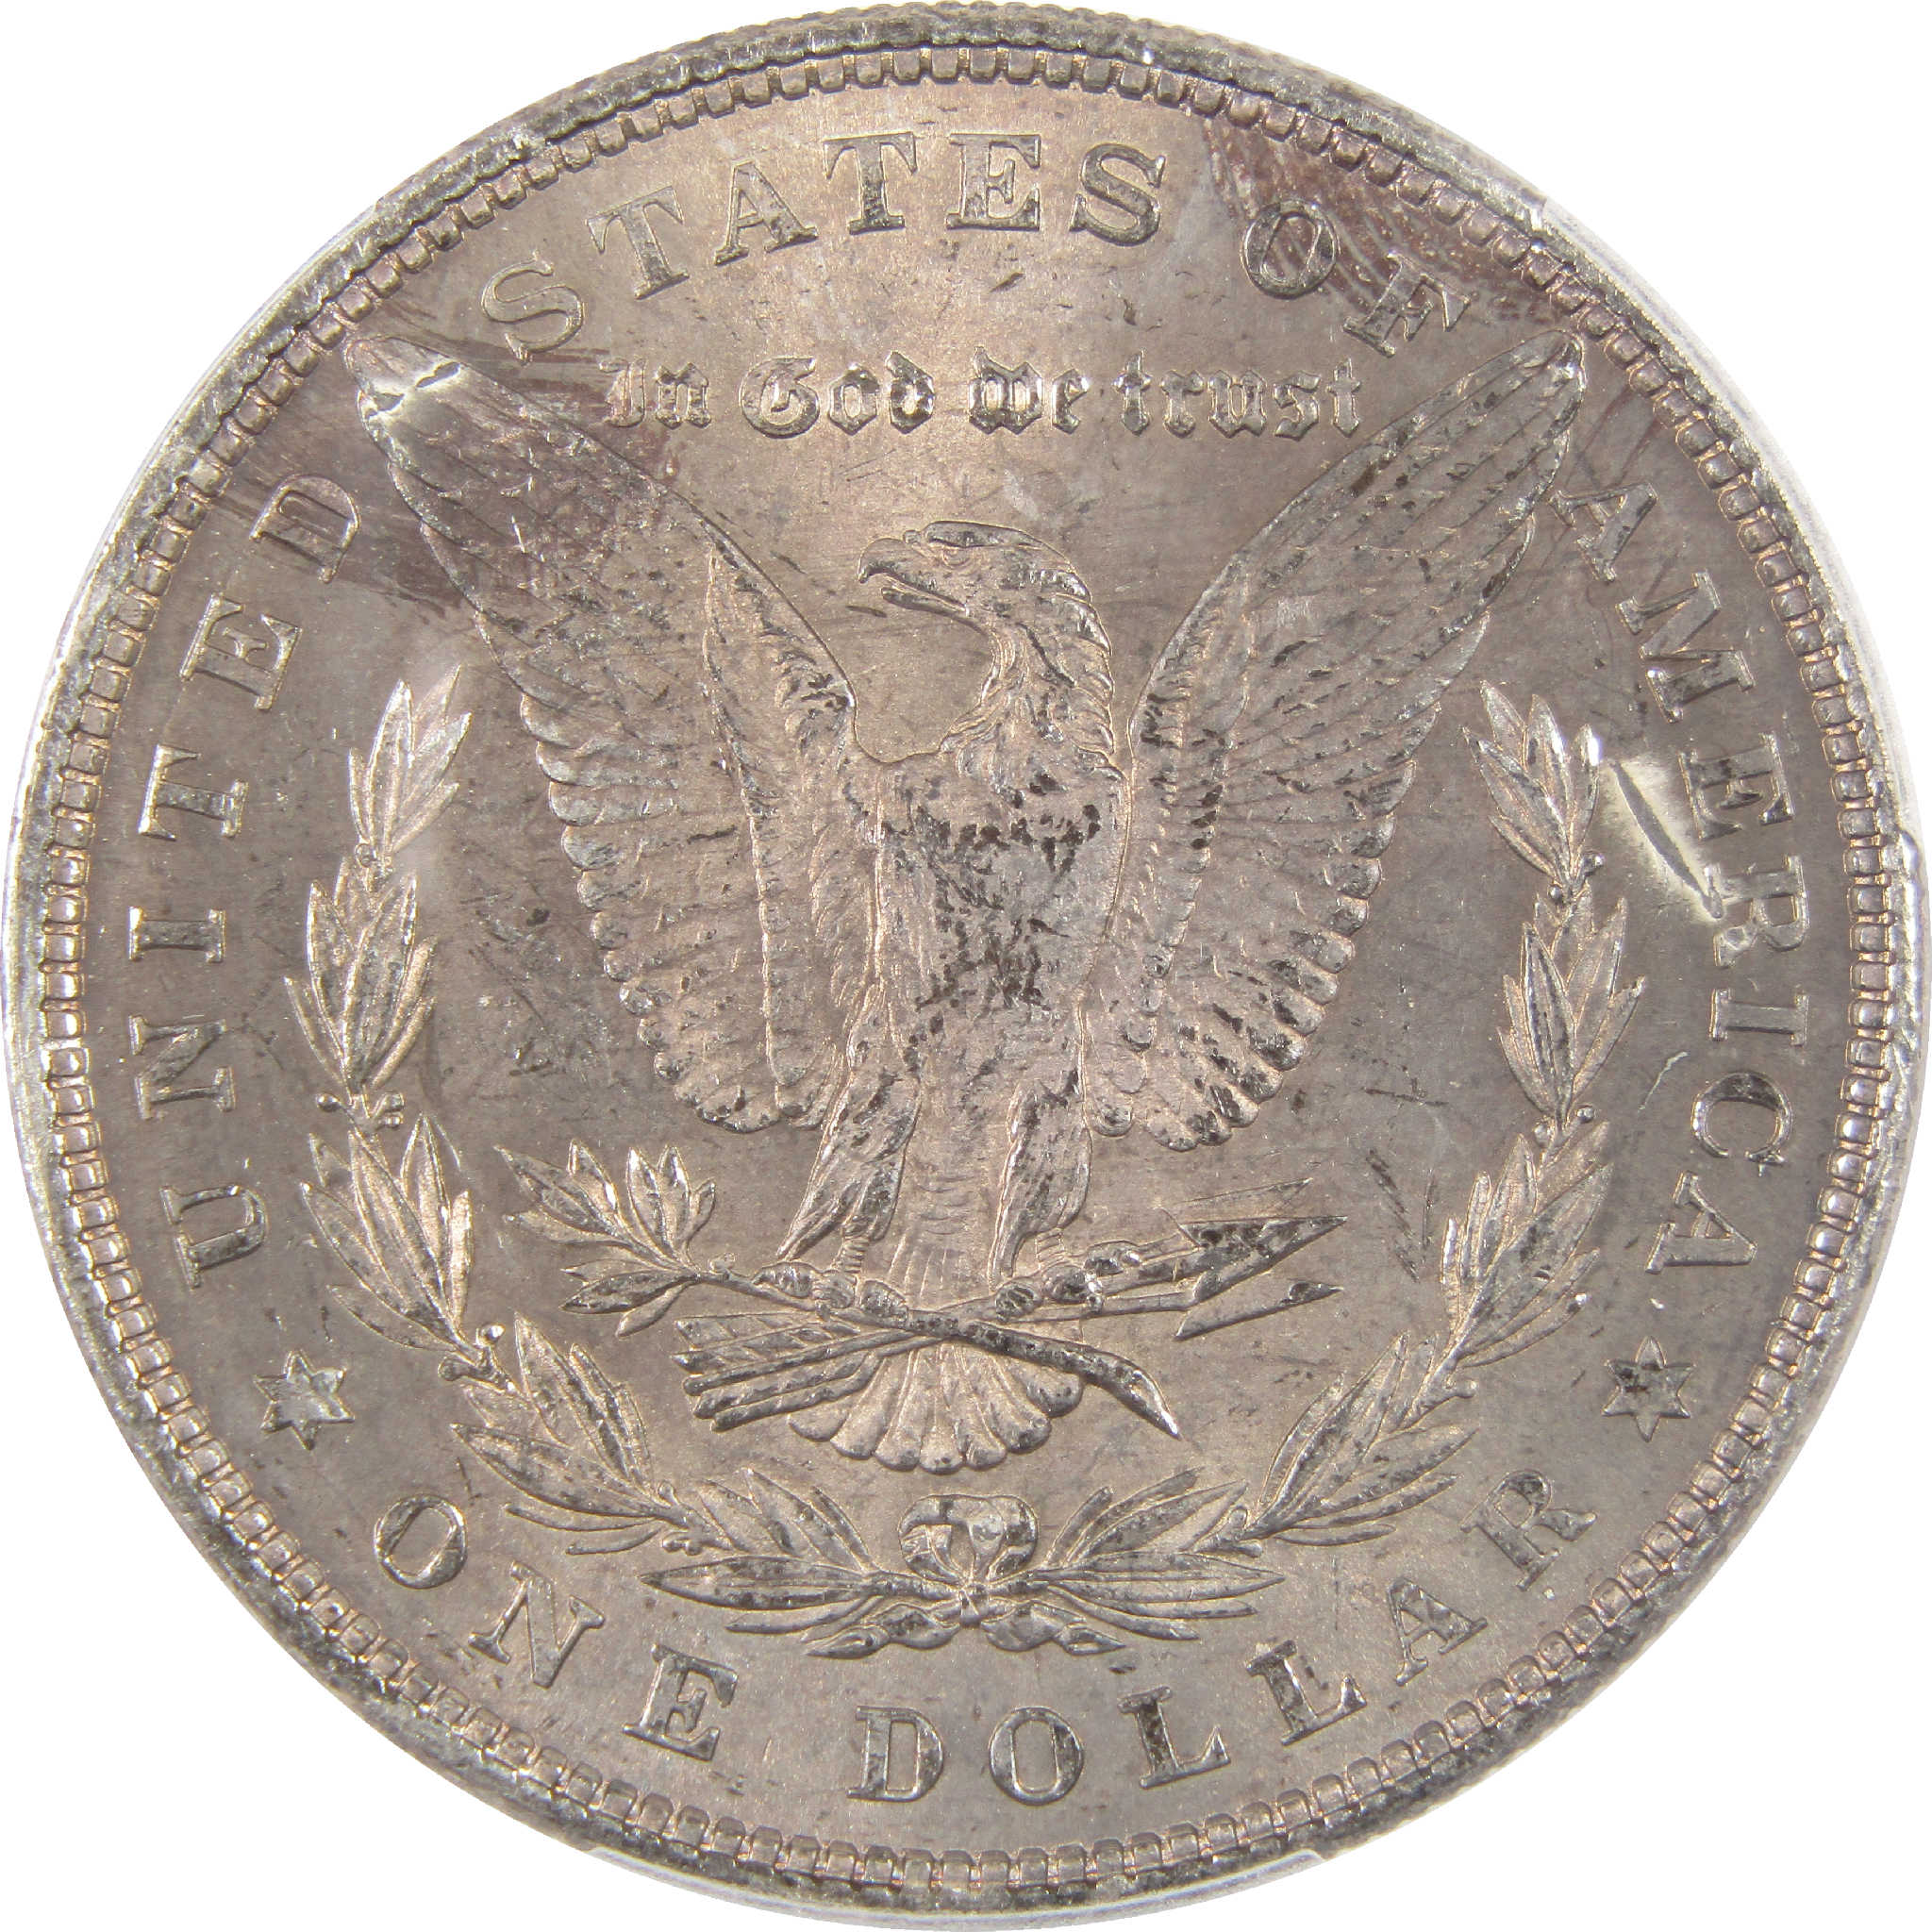 1878 7TF Rev 79 Morgan Dollar MS 63 PCGS Silver $1 Unc SKU:I11314 - Morgan coin - Morgan silver dollar - Morgan silver dollar for sale - Profile Coins &amp; Collectibles